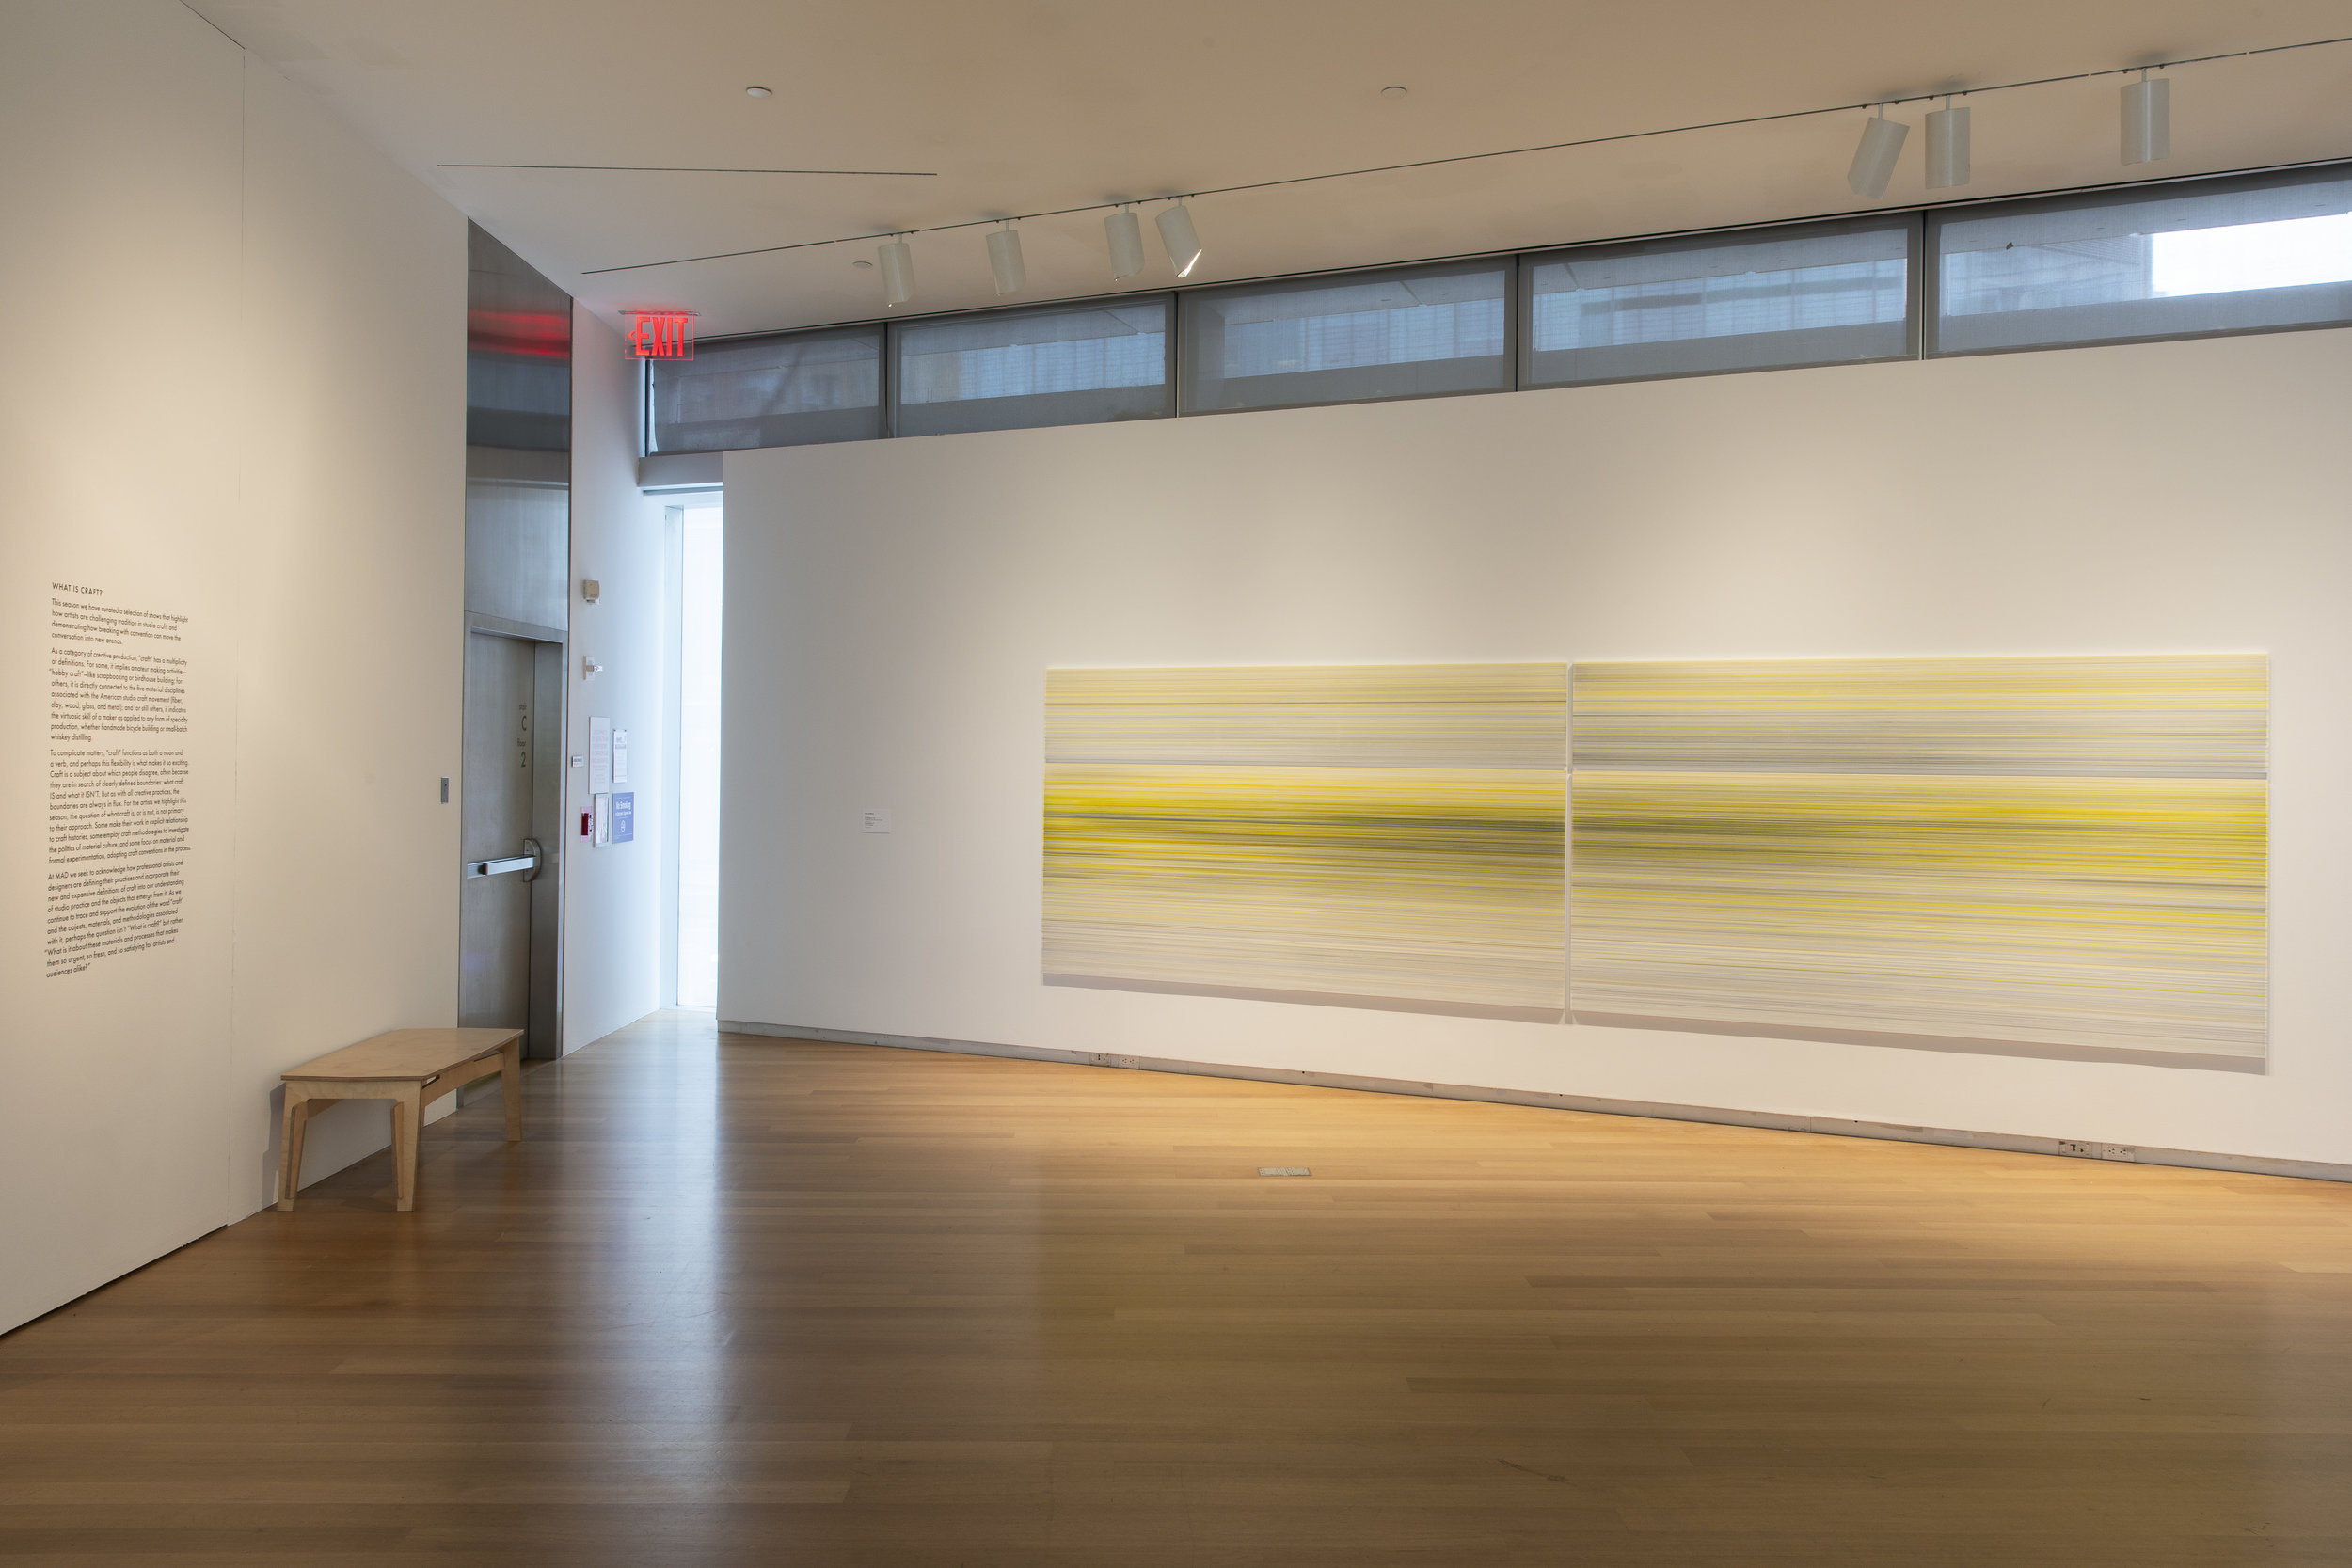    the walking eye   - installation view 2018 graphite and colored pencil on mat board 5 x 17 feet (four panels) photograph by Jenna Bascom, courtesy the Museum of Arts and Design 